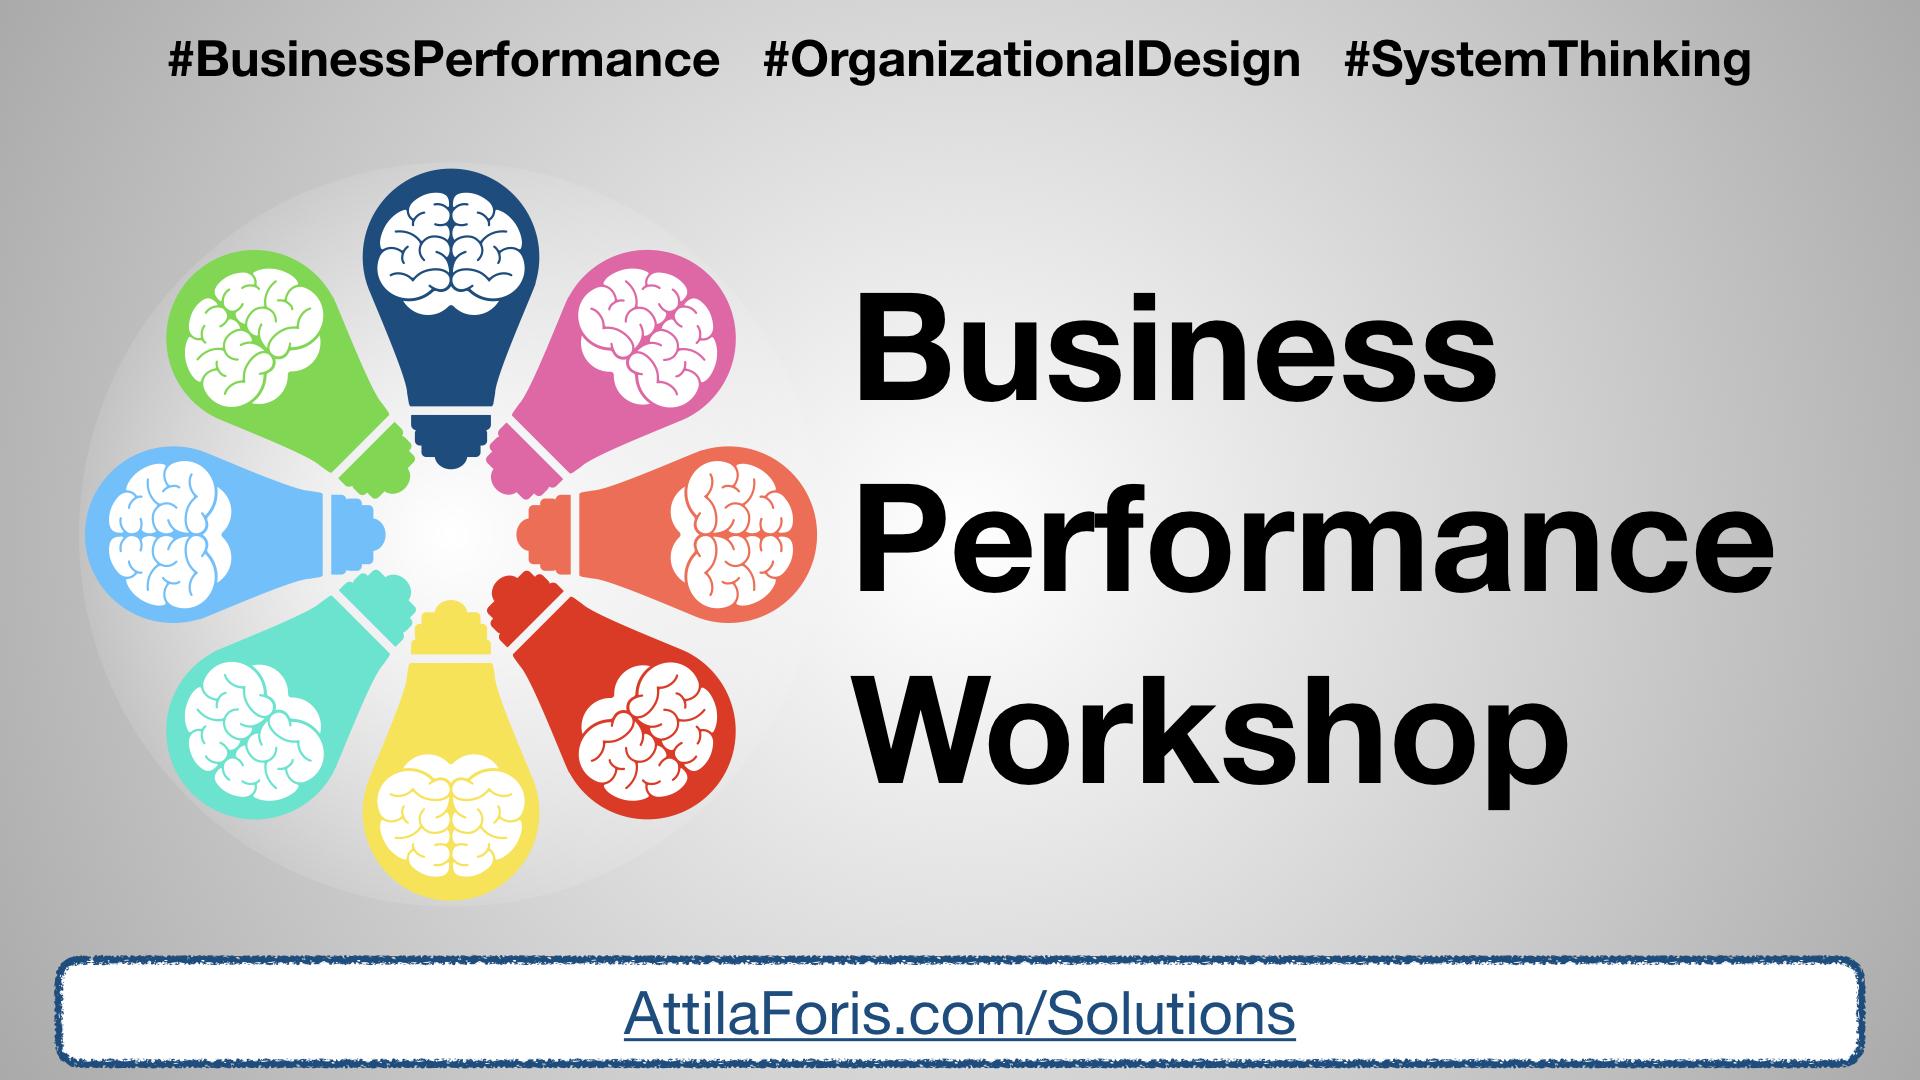 Are you satisfied with your business performance?